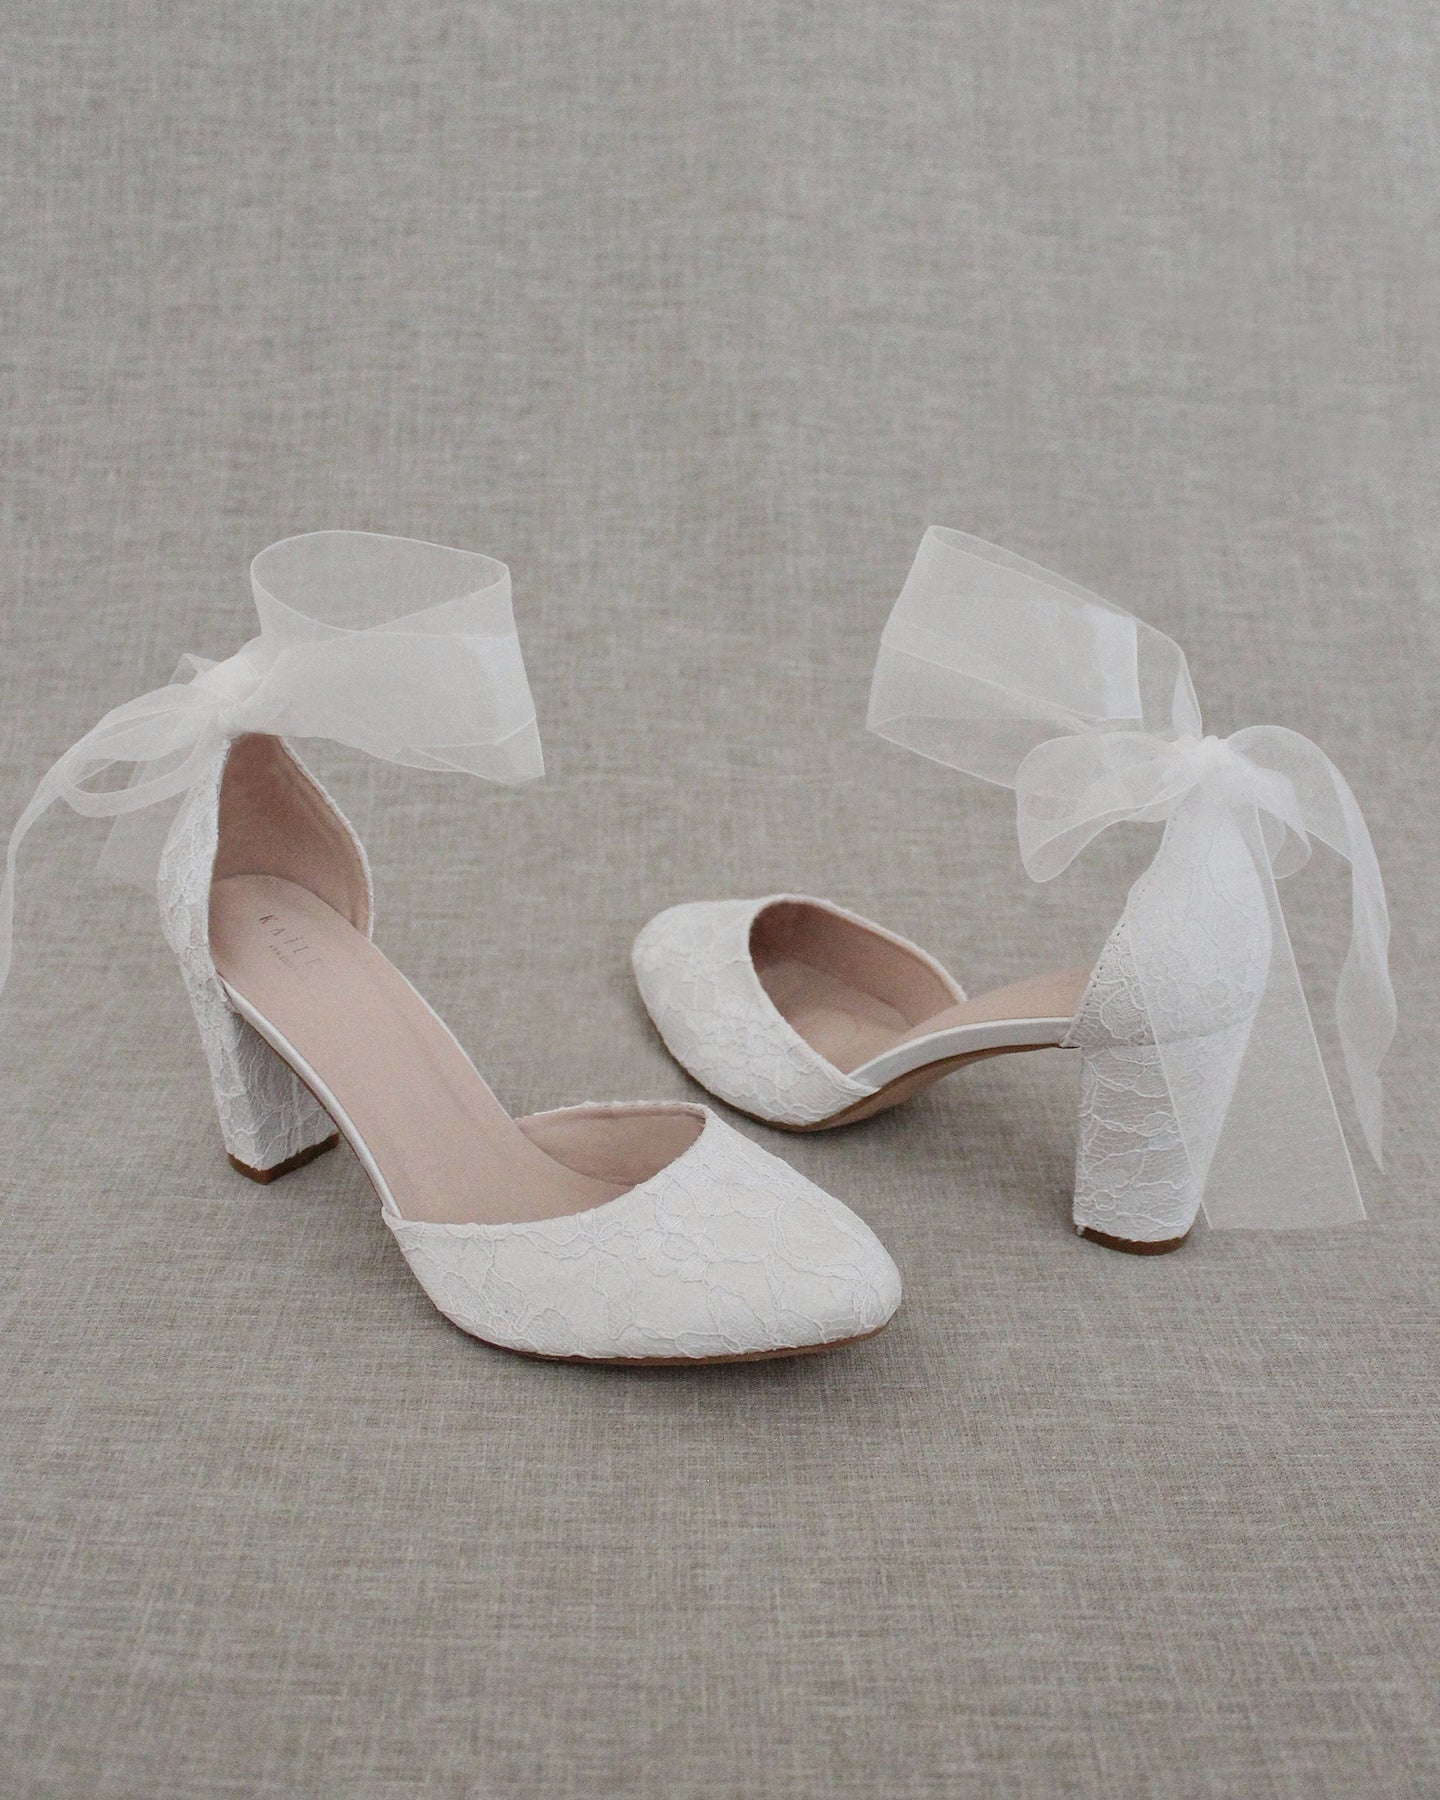 White Lace Block Heel with Wrapped Satin Tie - White Lace Heels ...